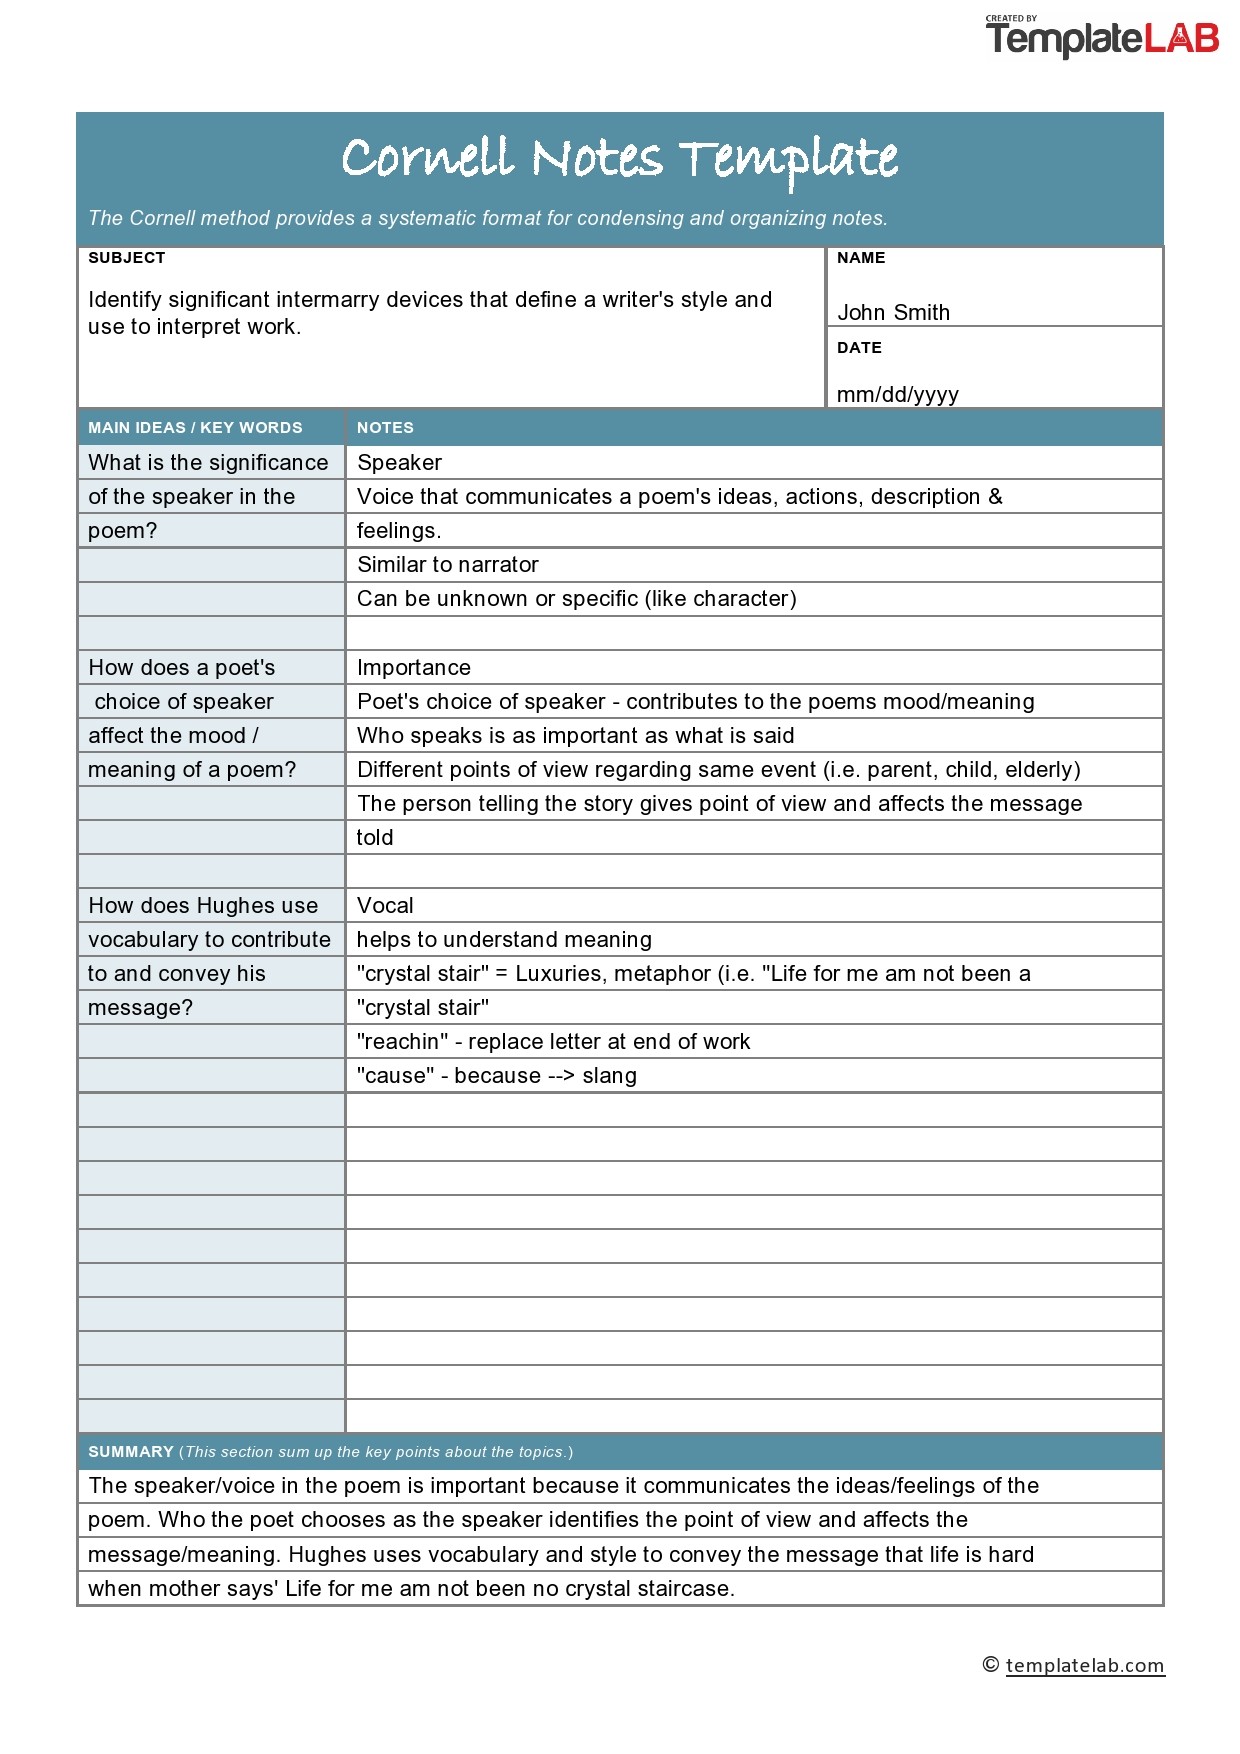 37 Cornell Notes Templates Examples Word Excel PDF ᐅ